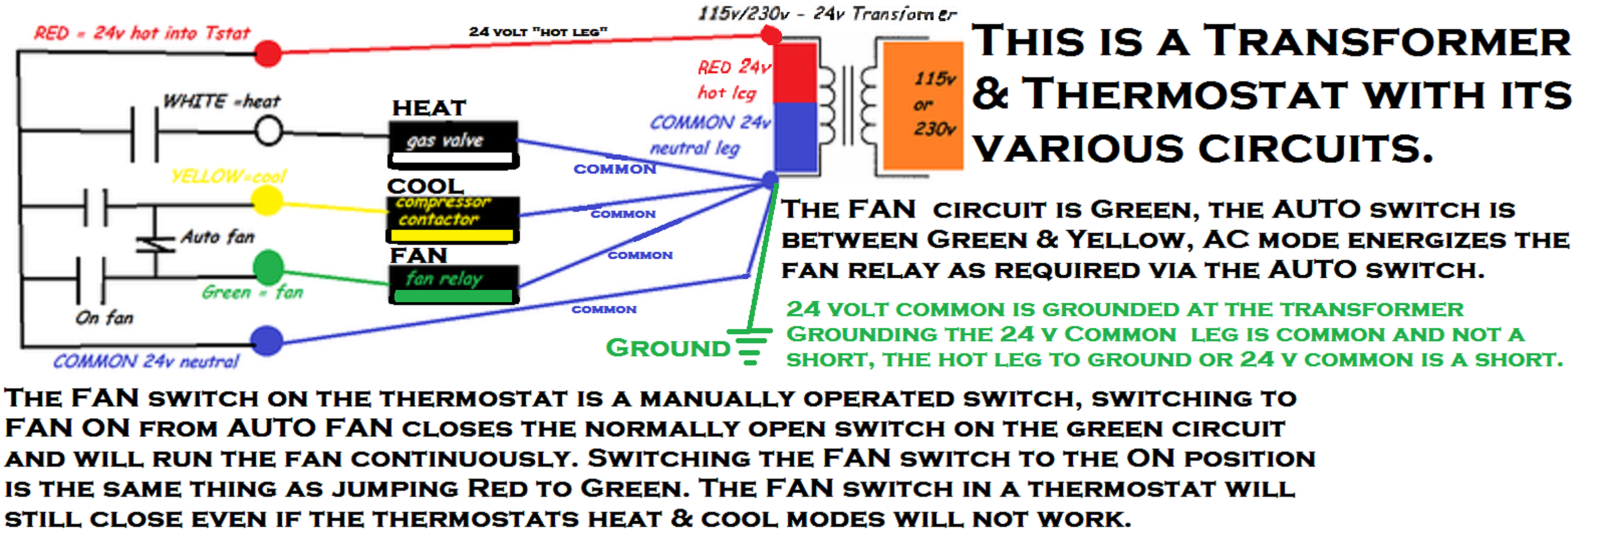 Hvac - How To Move From Rh/rc Thermostat To C Thermostat In Ac Only - Honeywell Thermostat Wiring Diagram 3 Wire